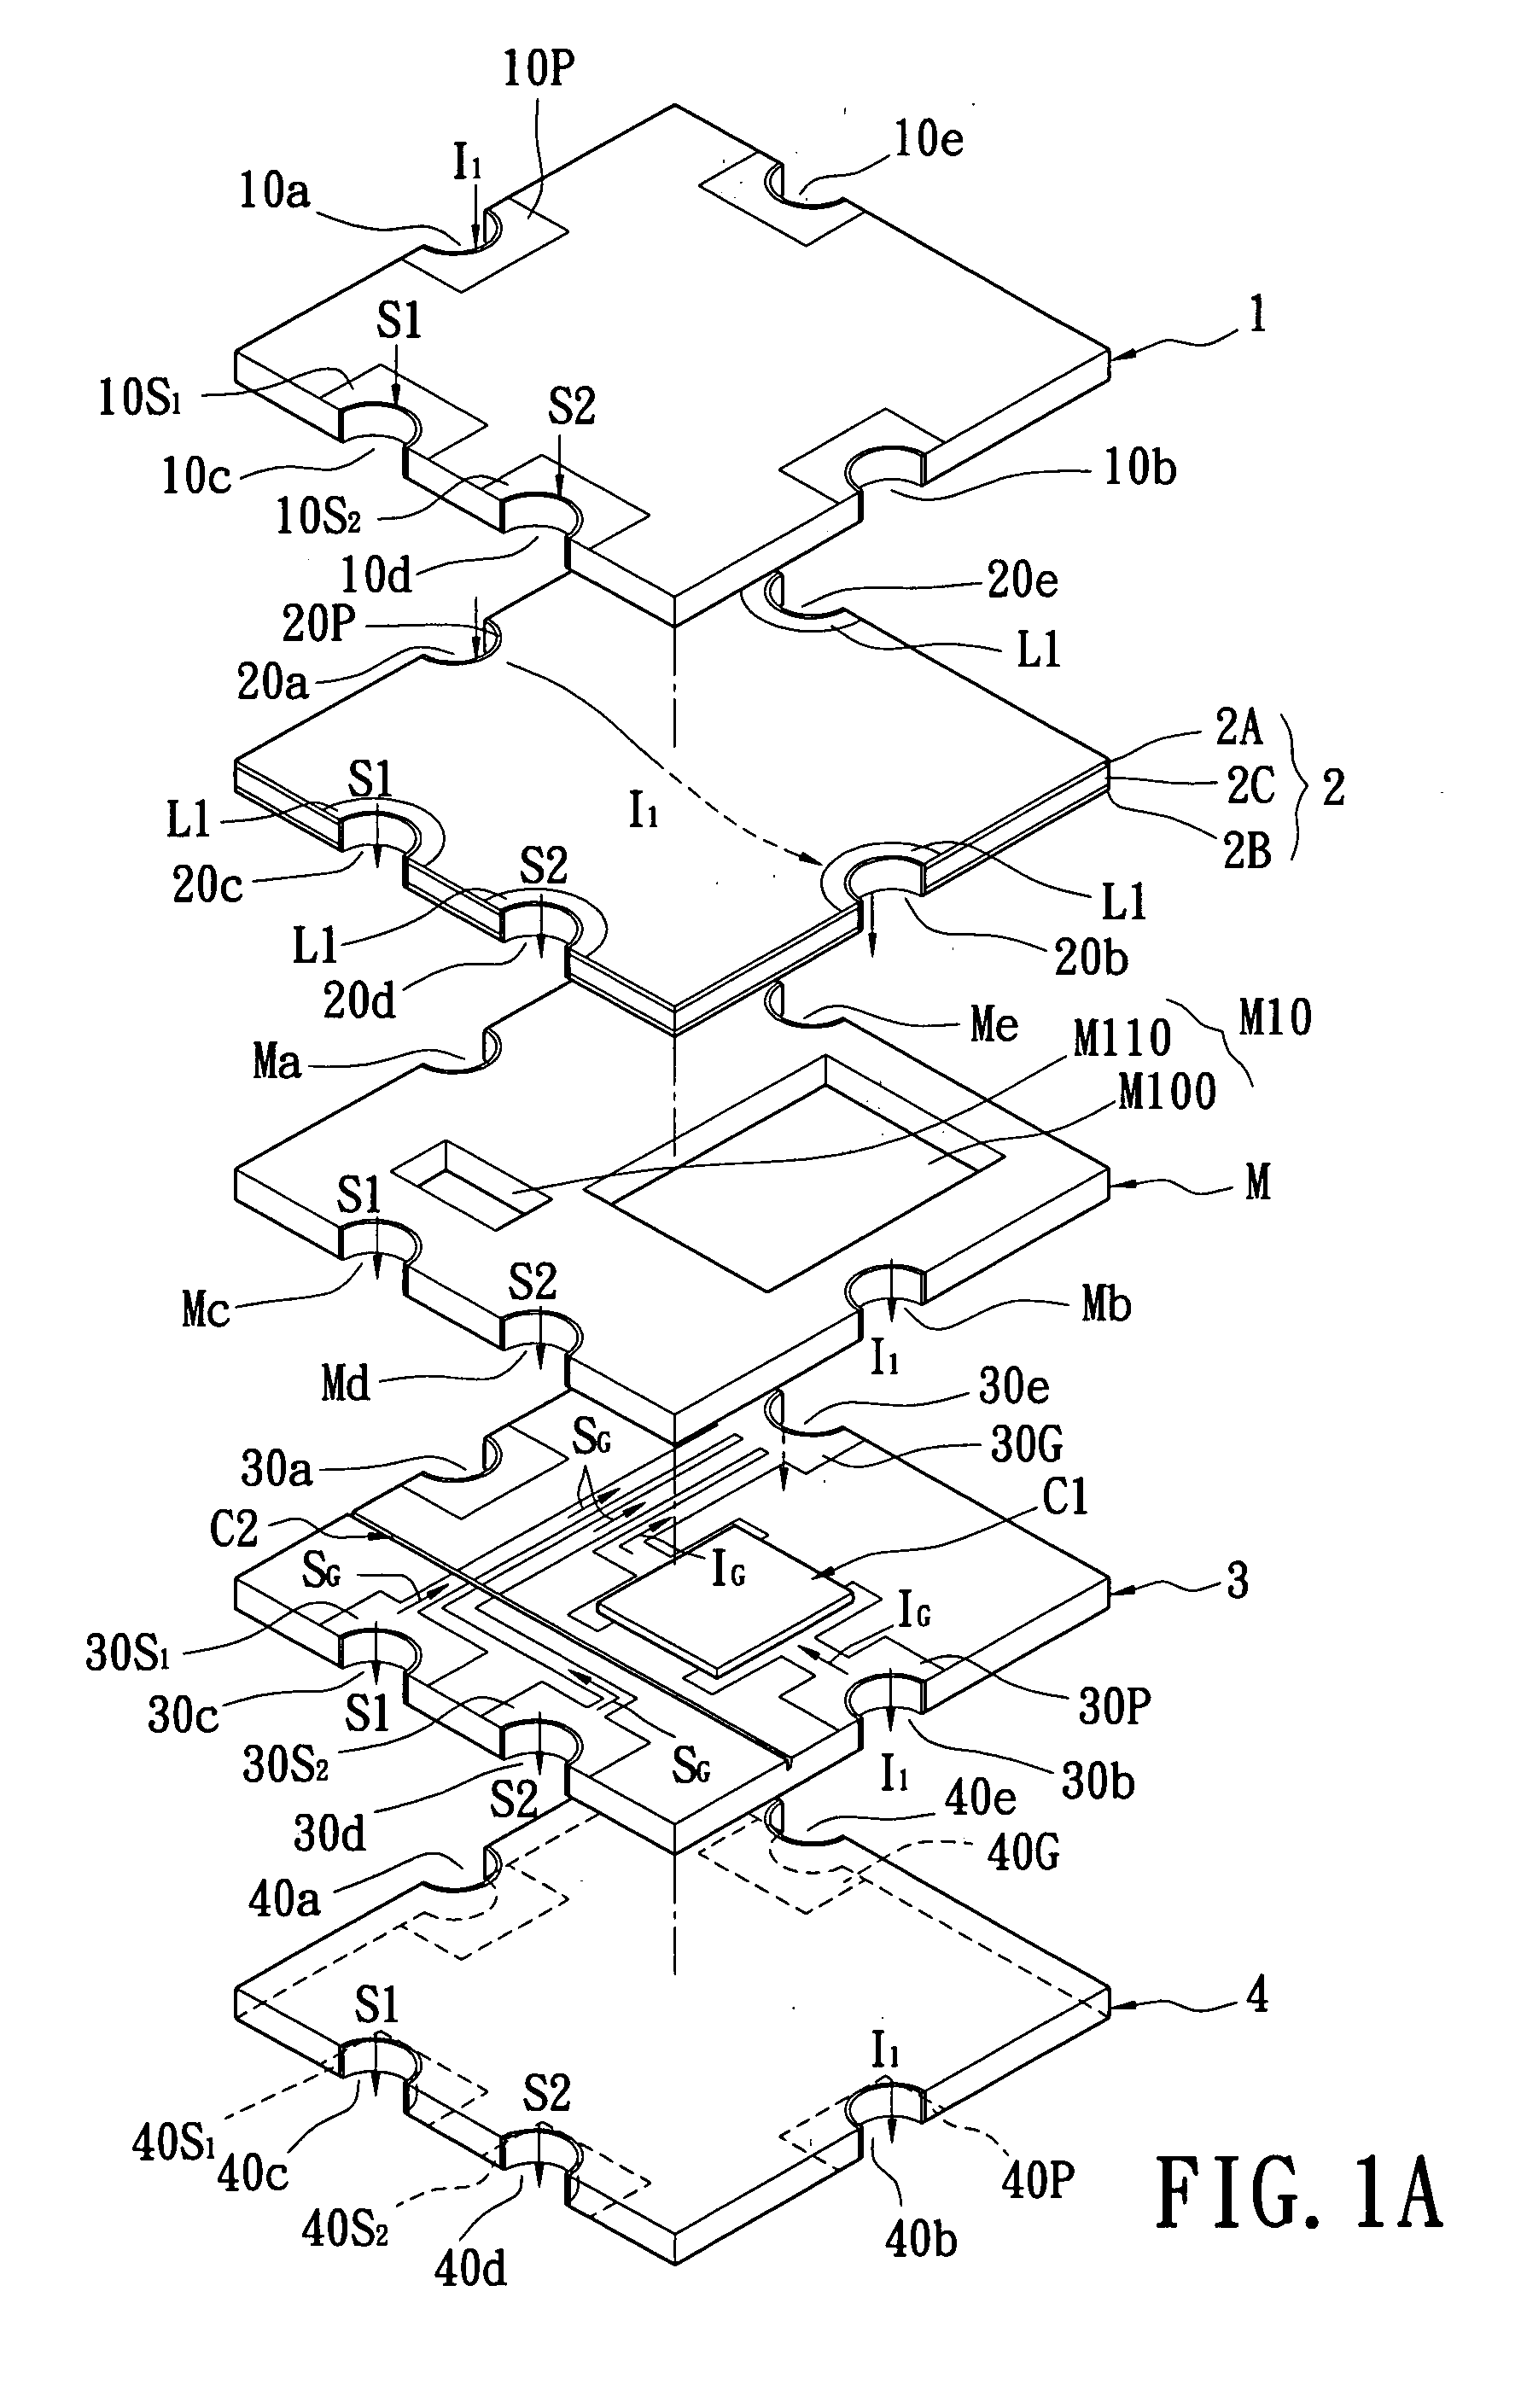 Embedded type multifunctional integrated structure for integrating protection components and method for manufacturing the same